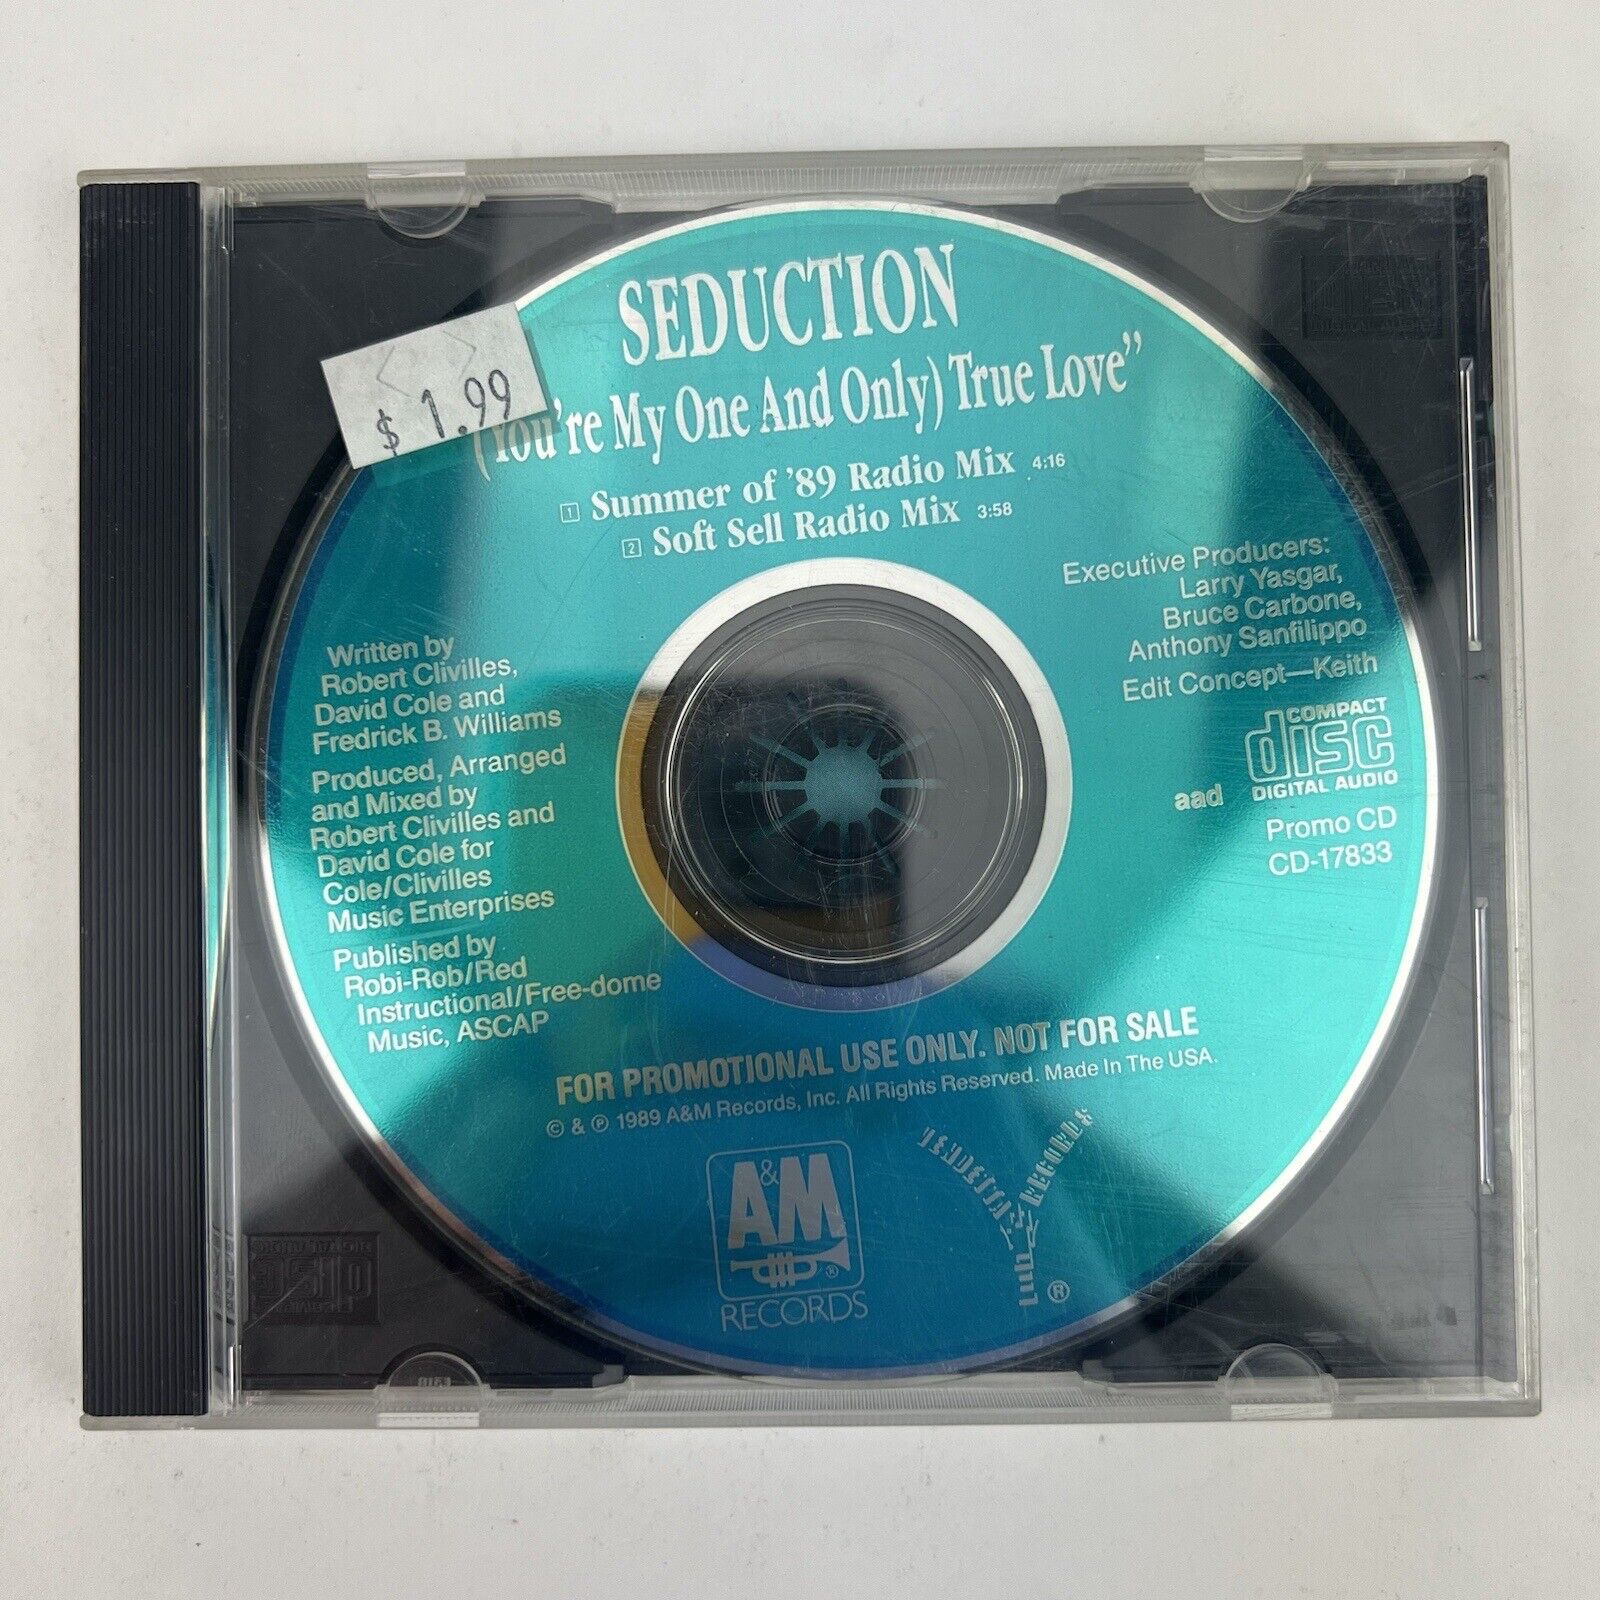 MEGA RARE 1989 PROMO CD - Seduction – (You\'re My One And Only) True Love - A&M